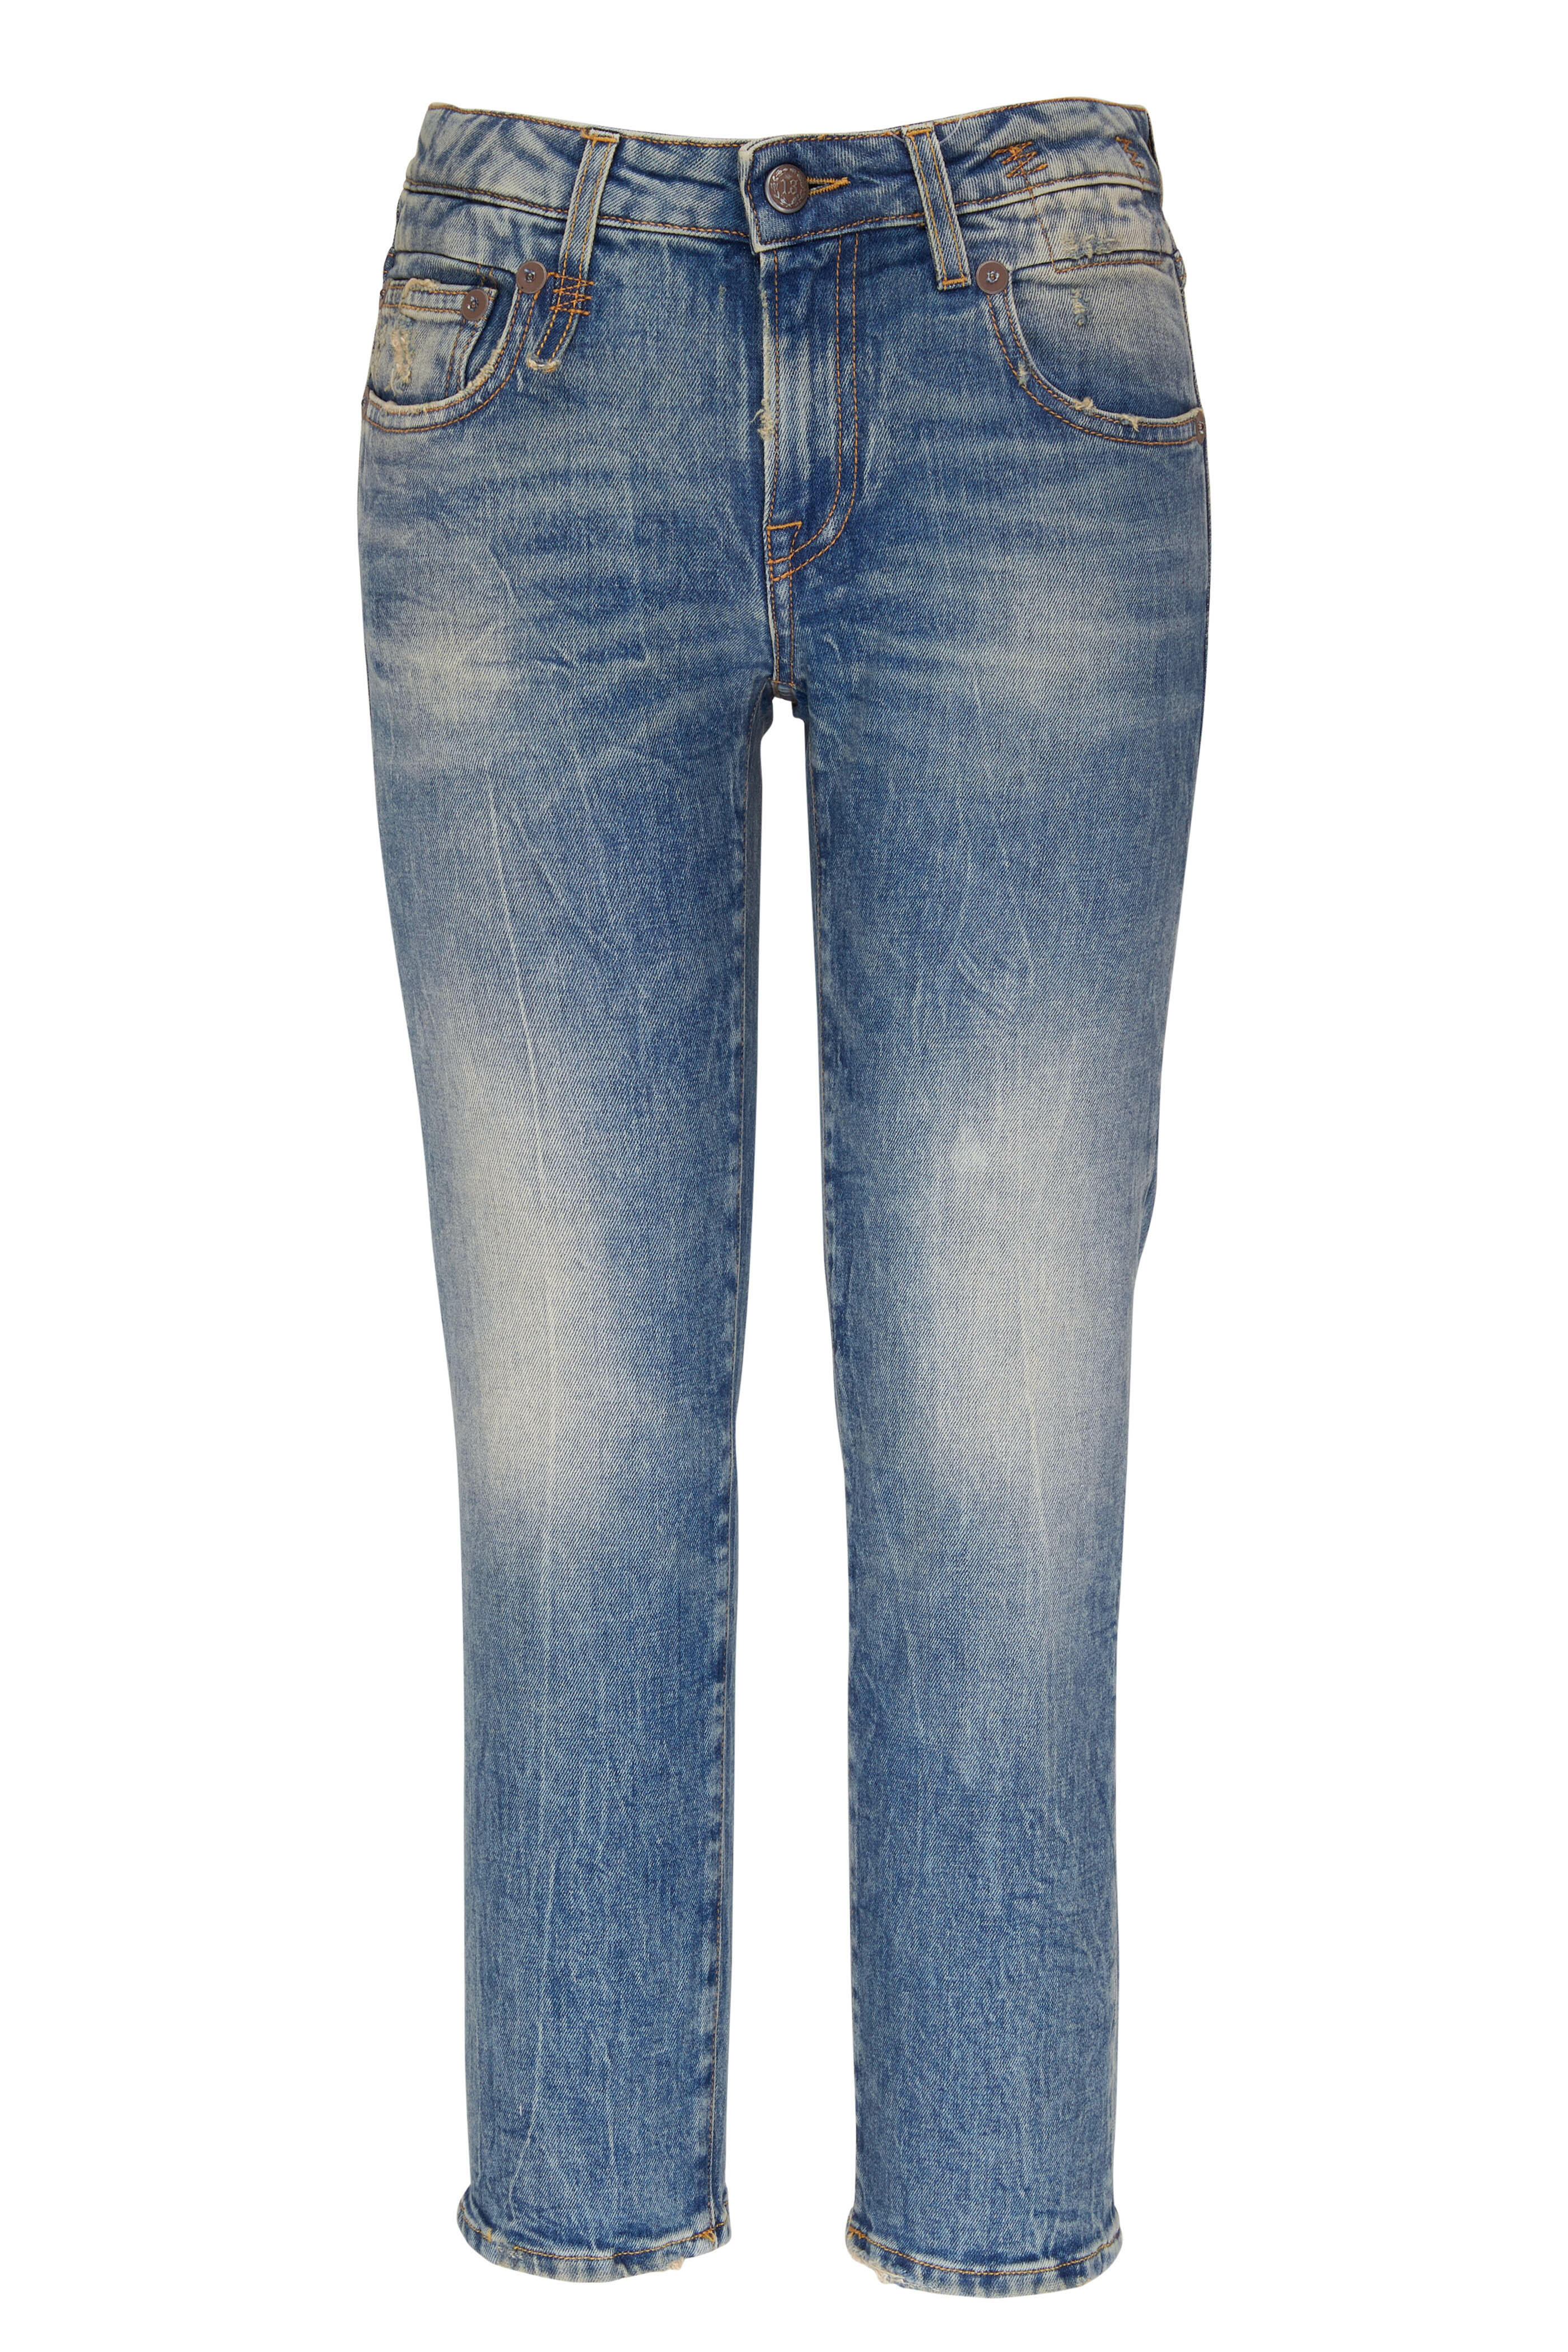 R13 - Boy Straight Kelly Stretch Jeans | Mitchell Stores